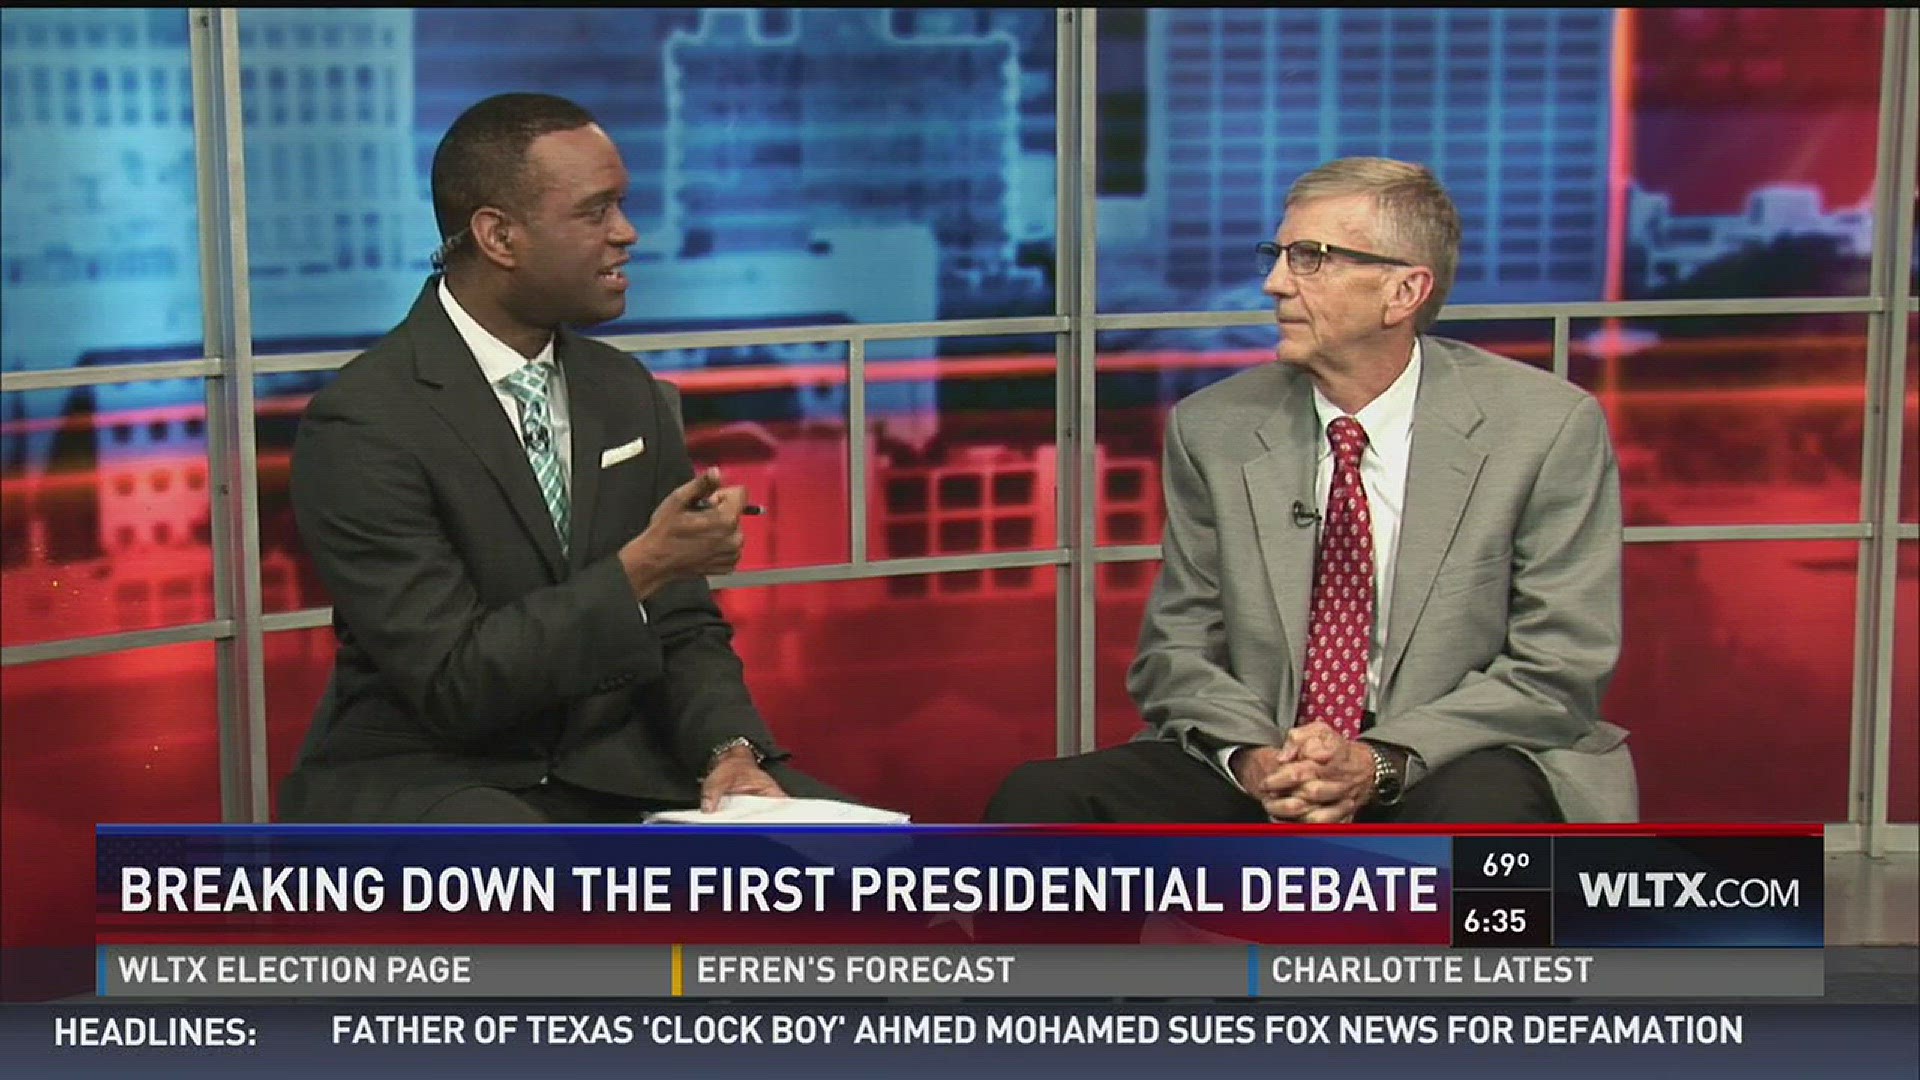 USC Political Science Professor, Dr, Robert Oldendick, joins Deon for more discussion of last night's debate.